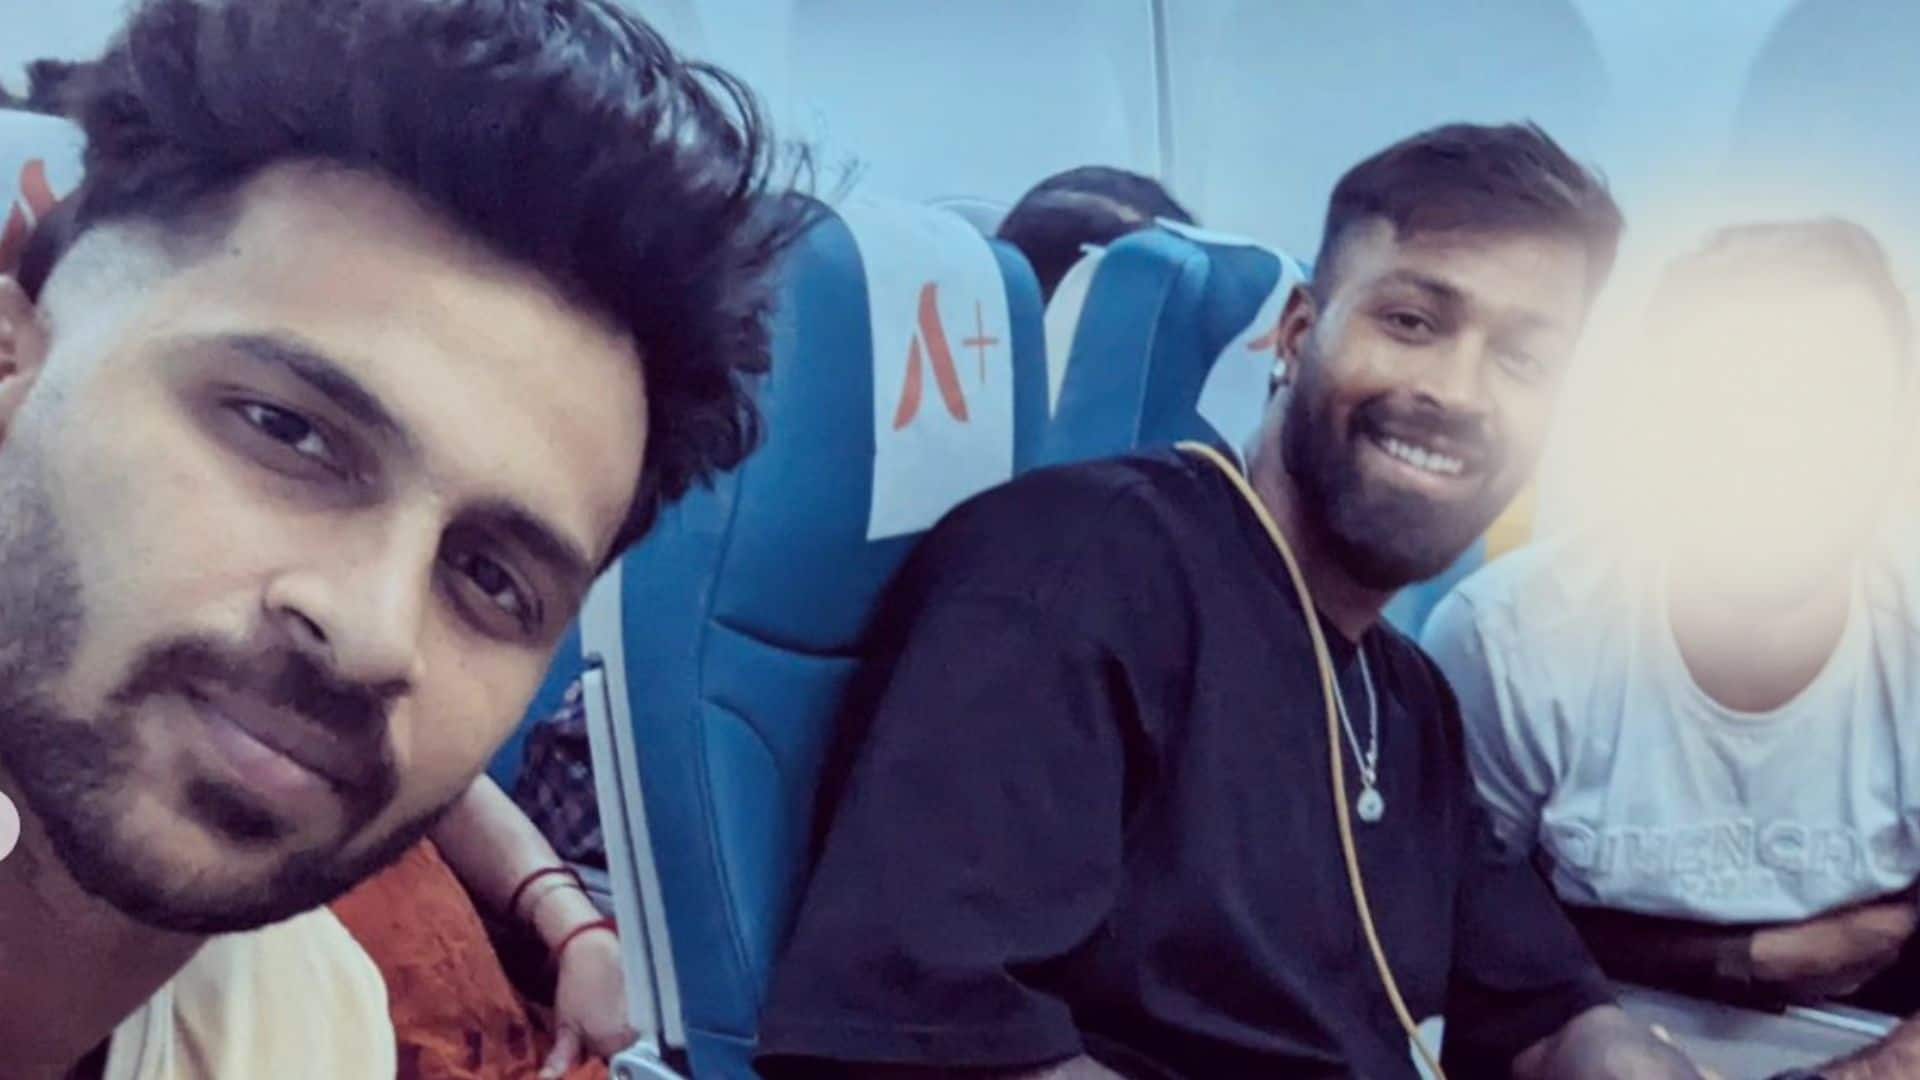 [Watch] Unexpected Old Friend Bumps Into Indian Squad In Flight